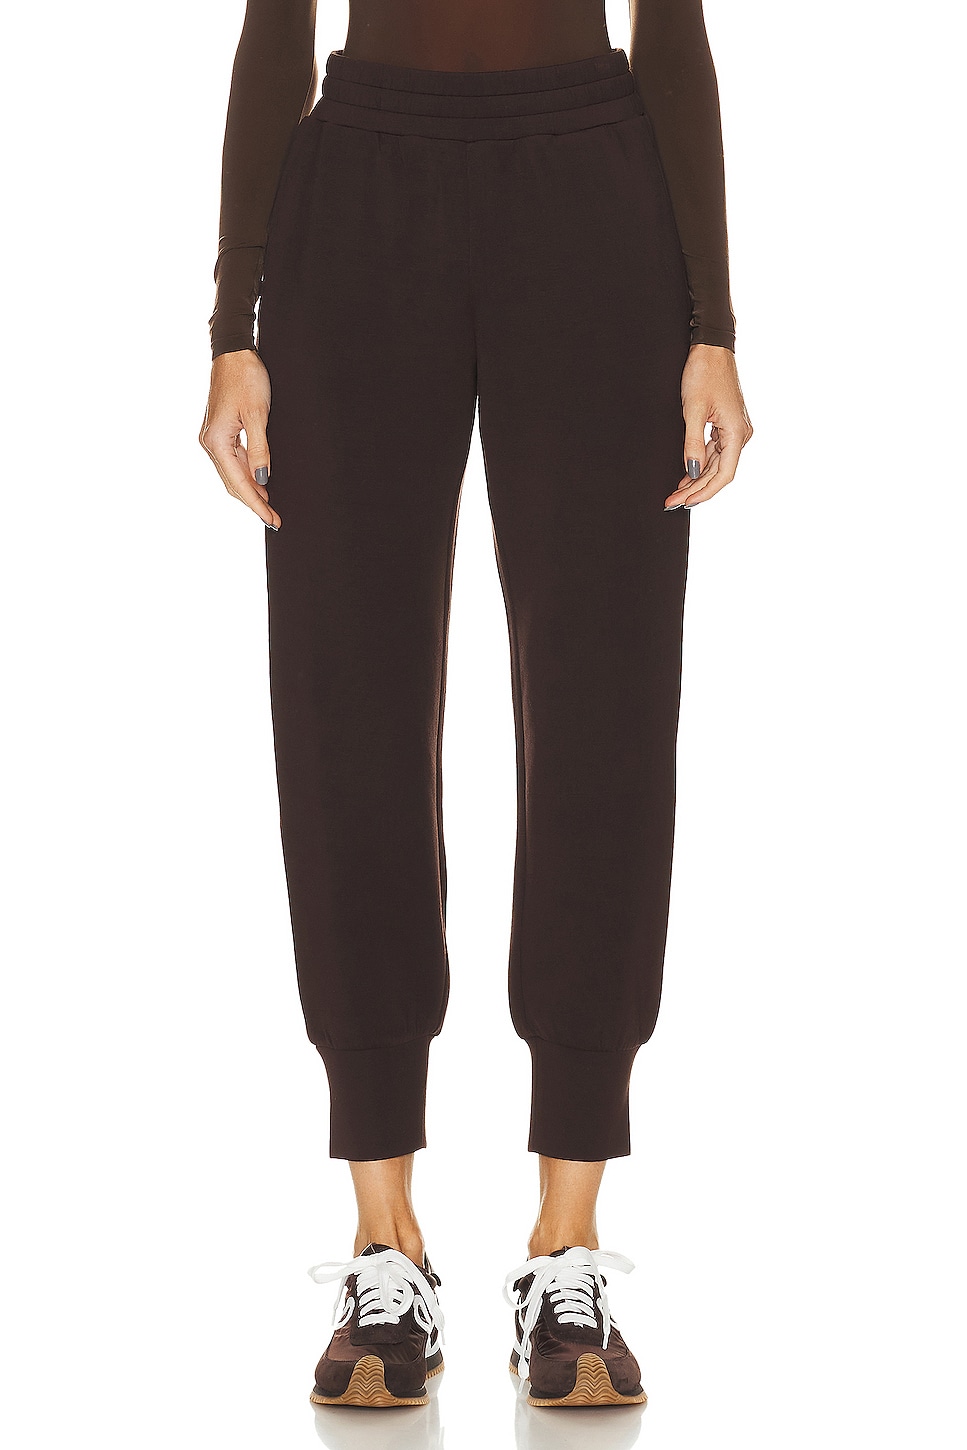 Image 1 of Varley The Slim Cuff Pant in Coffee Bean